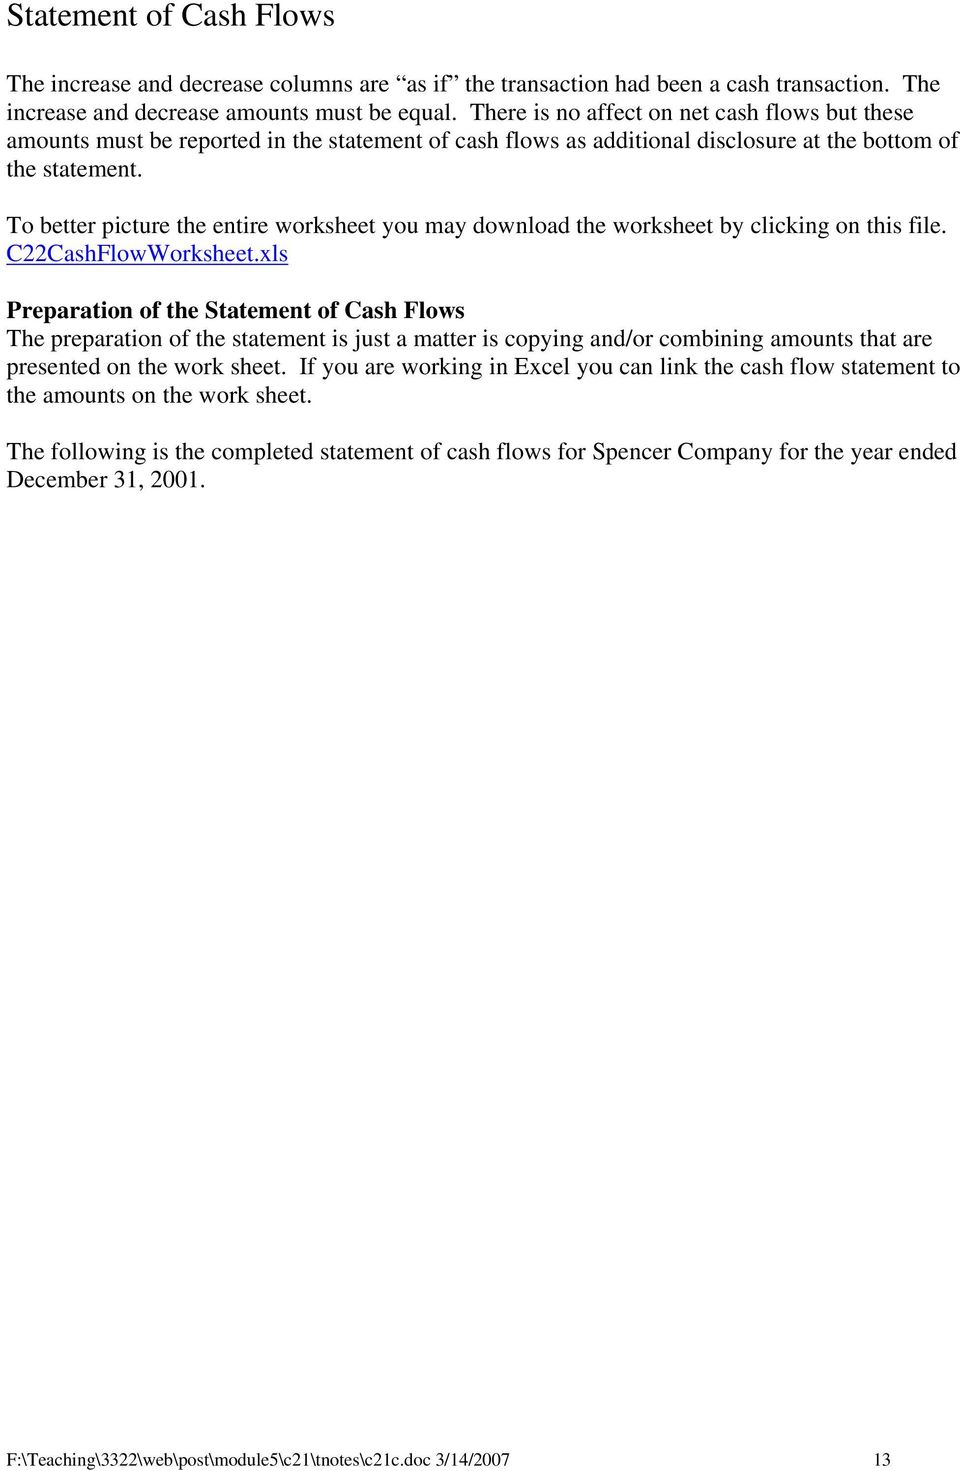 To better picture the entire worksheet you may download the worksheet by clicking on this file. C22CashFlowWorksheet.